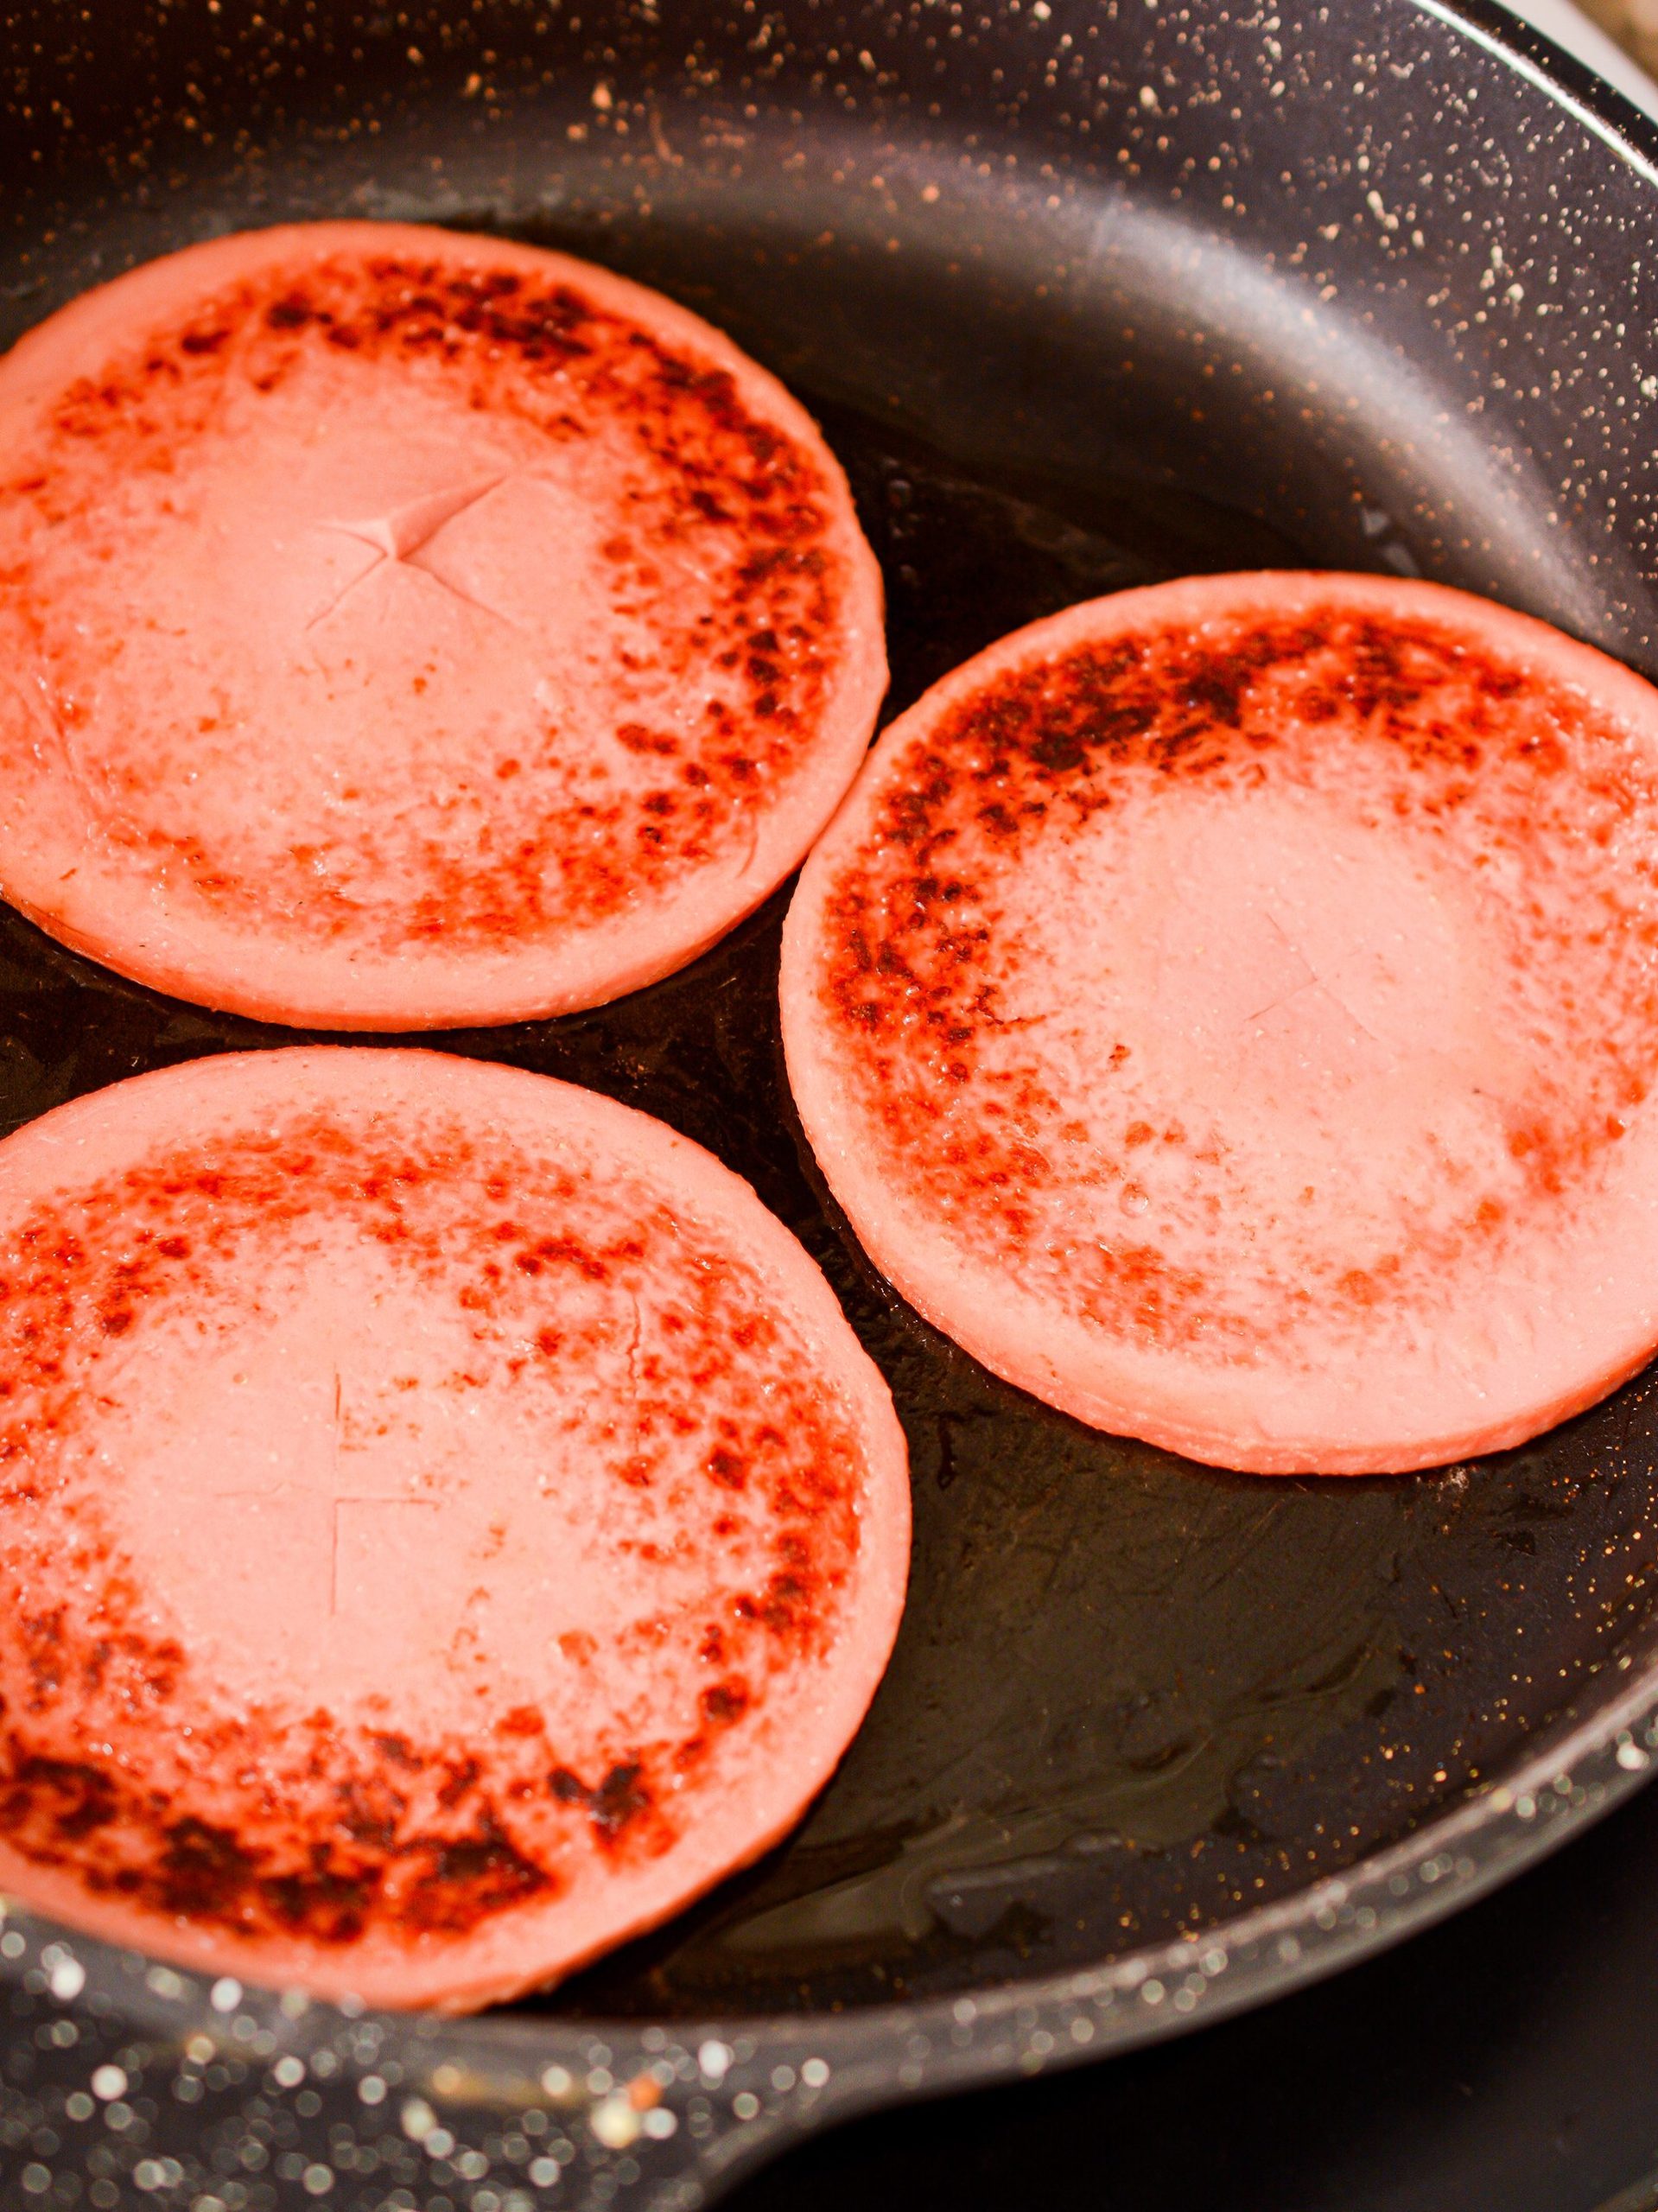 Heat a skillet over medium-high heat on the stove and spray well with cooking spray.